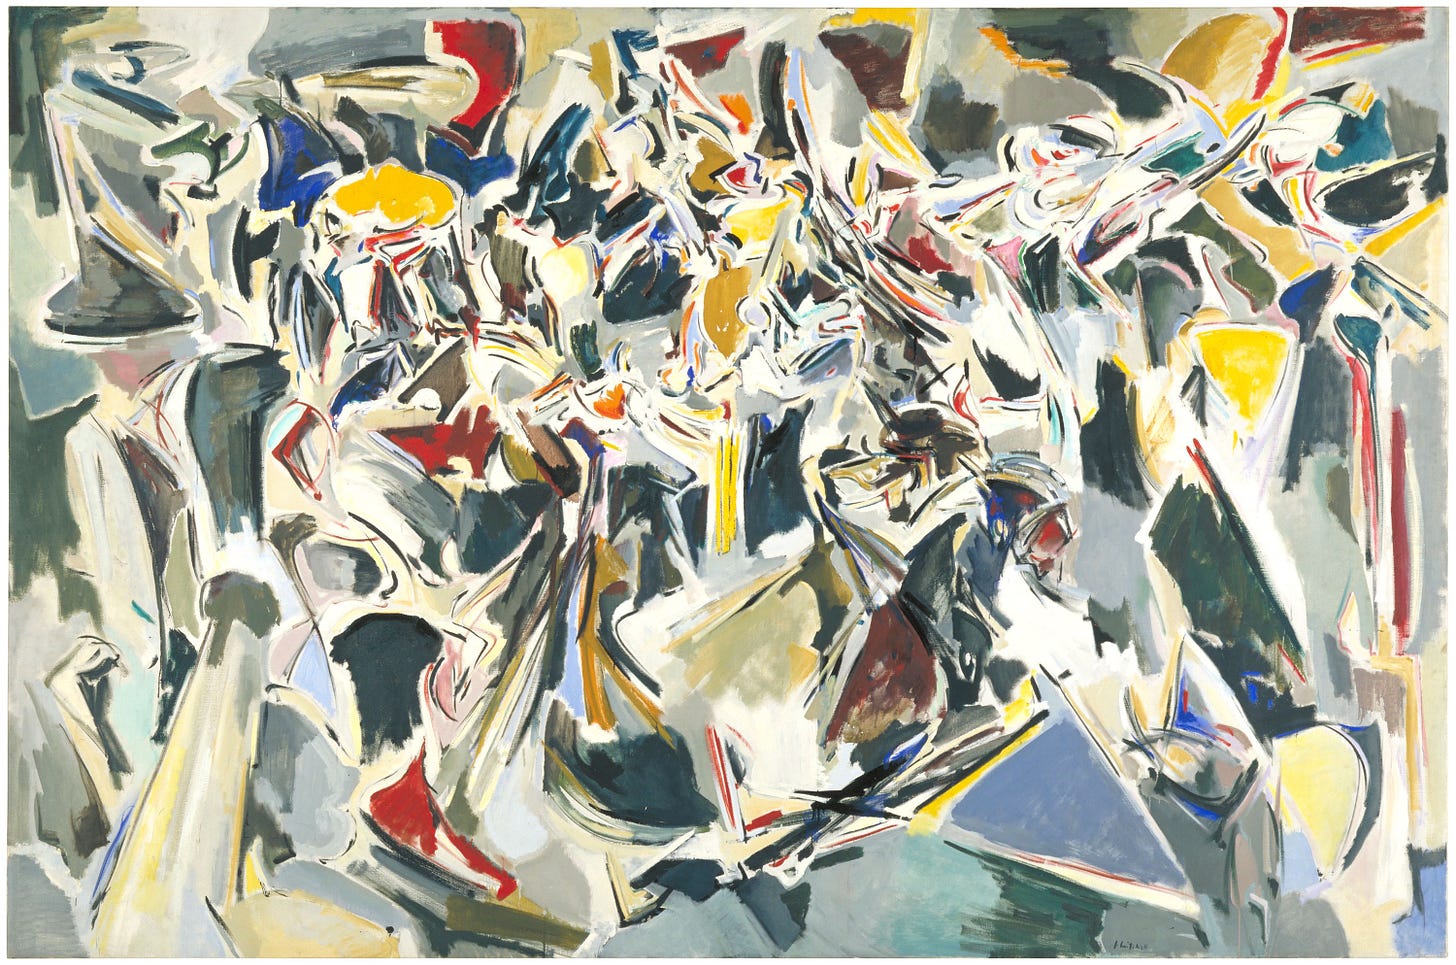 Cross Section of a Bridge, 1951, abstract painting by artist Joan Mitchell